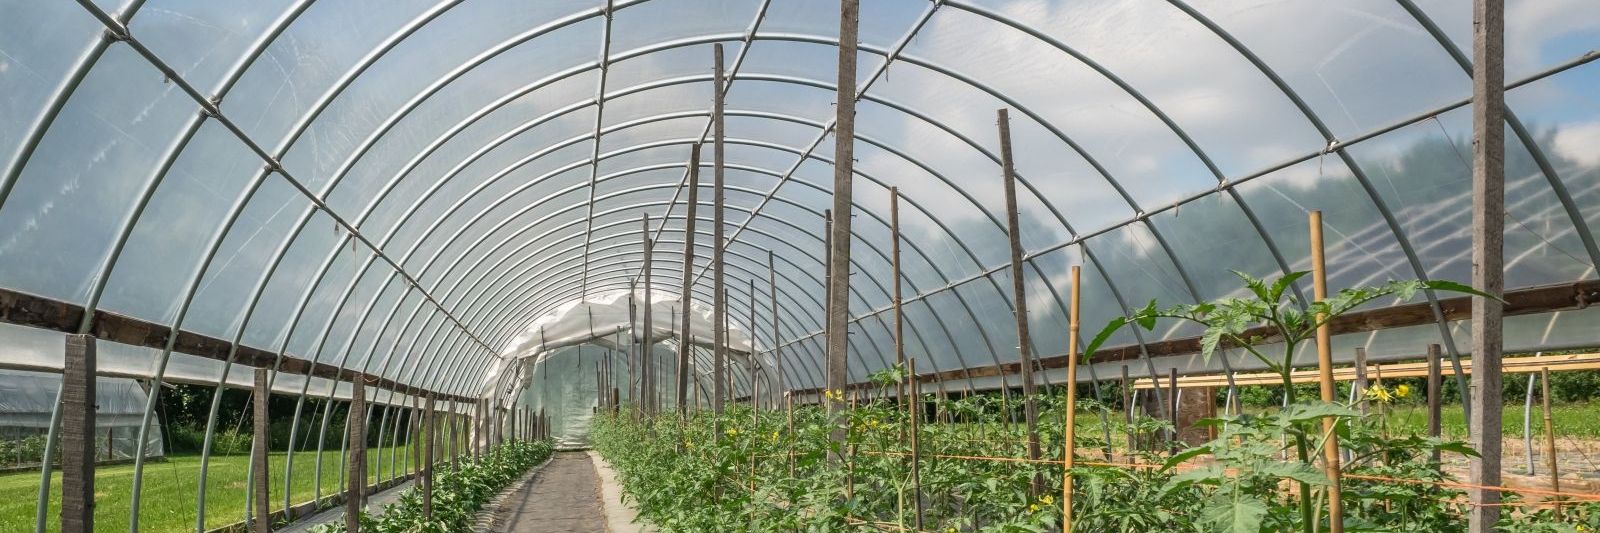 Greenhouse plastic roofing